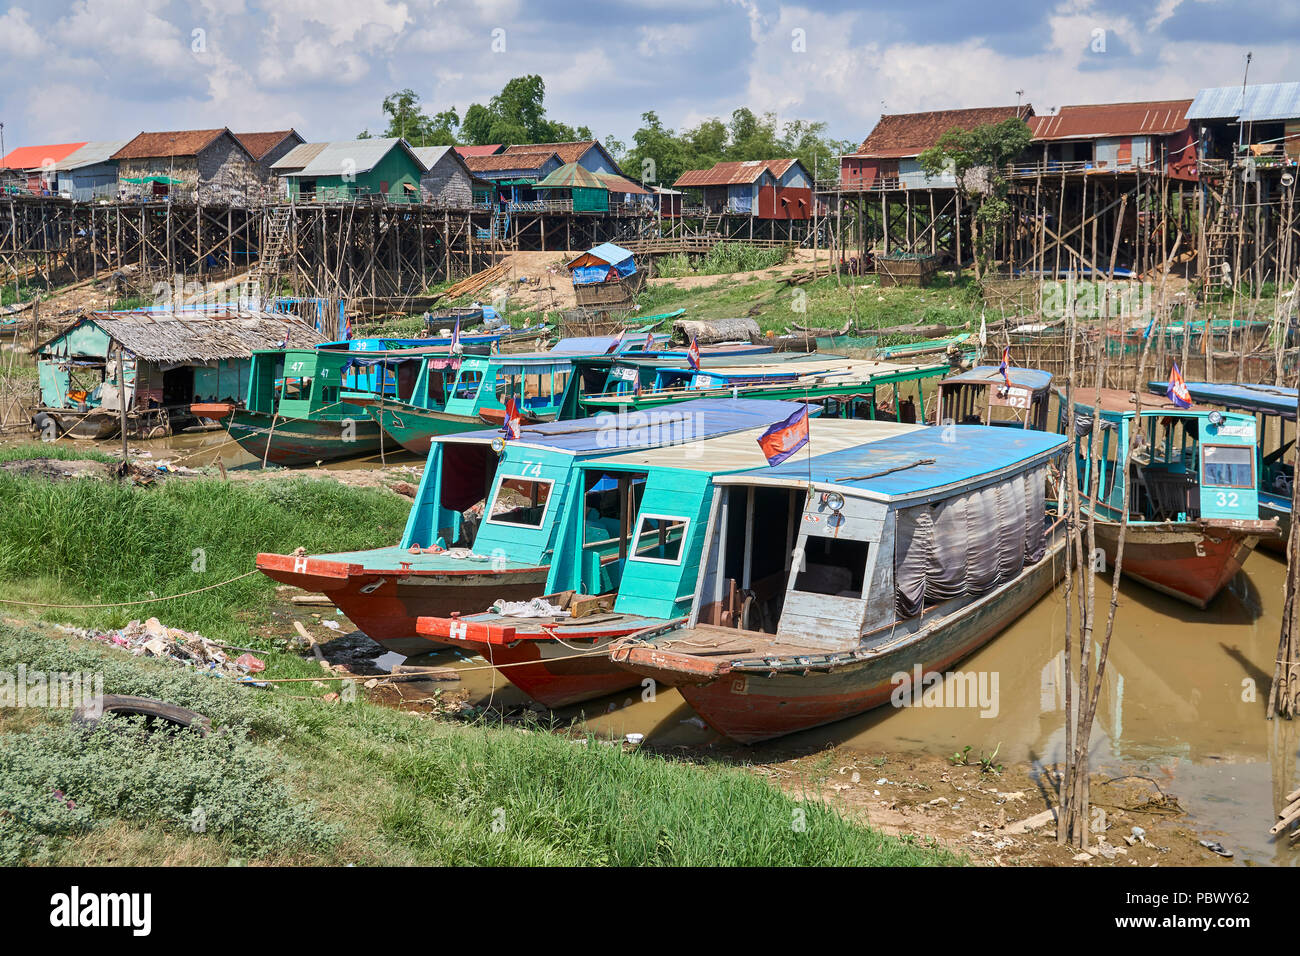 Stilt houses and boats on Tonle Sap lake in Cambodia Stock Photo